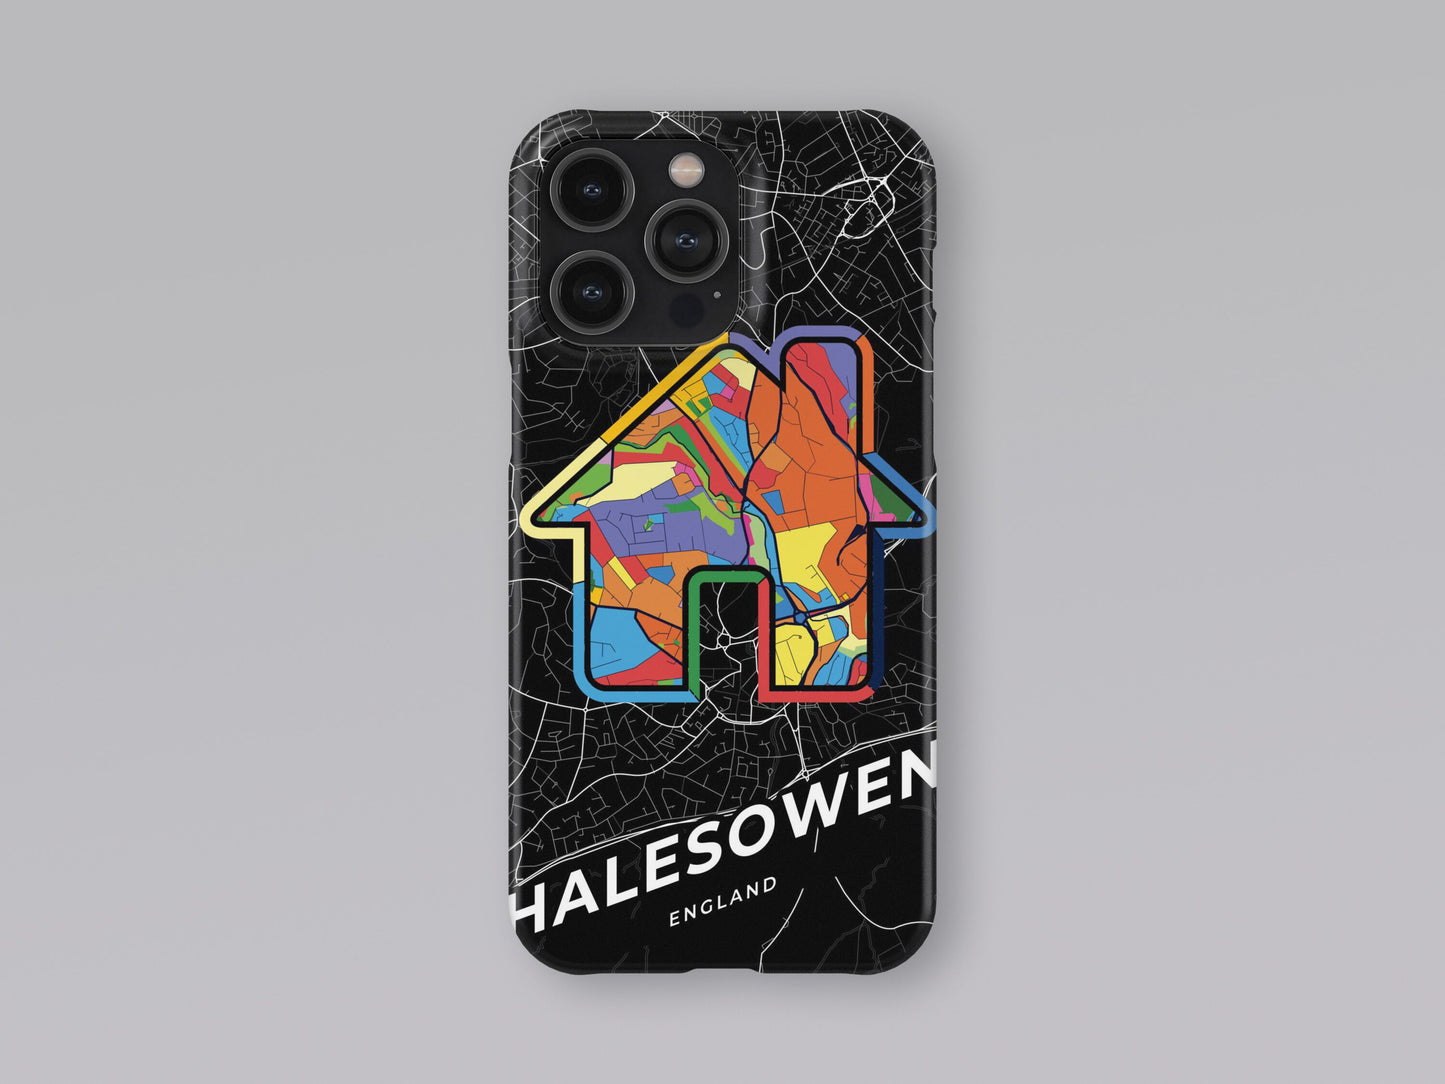 Halesowen England slim phone case with colorful icon. Birthday, wedding or housewarming gift. Couple match cases. 3